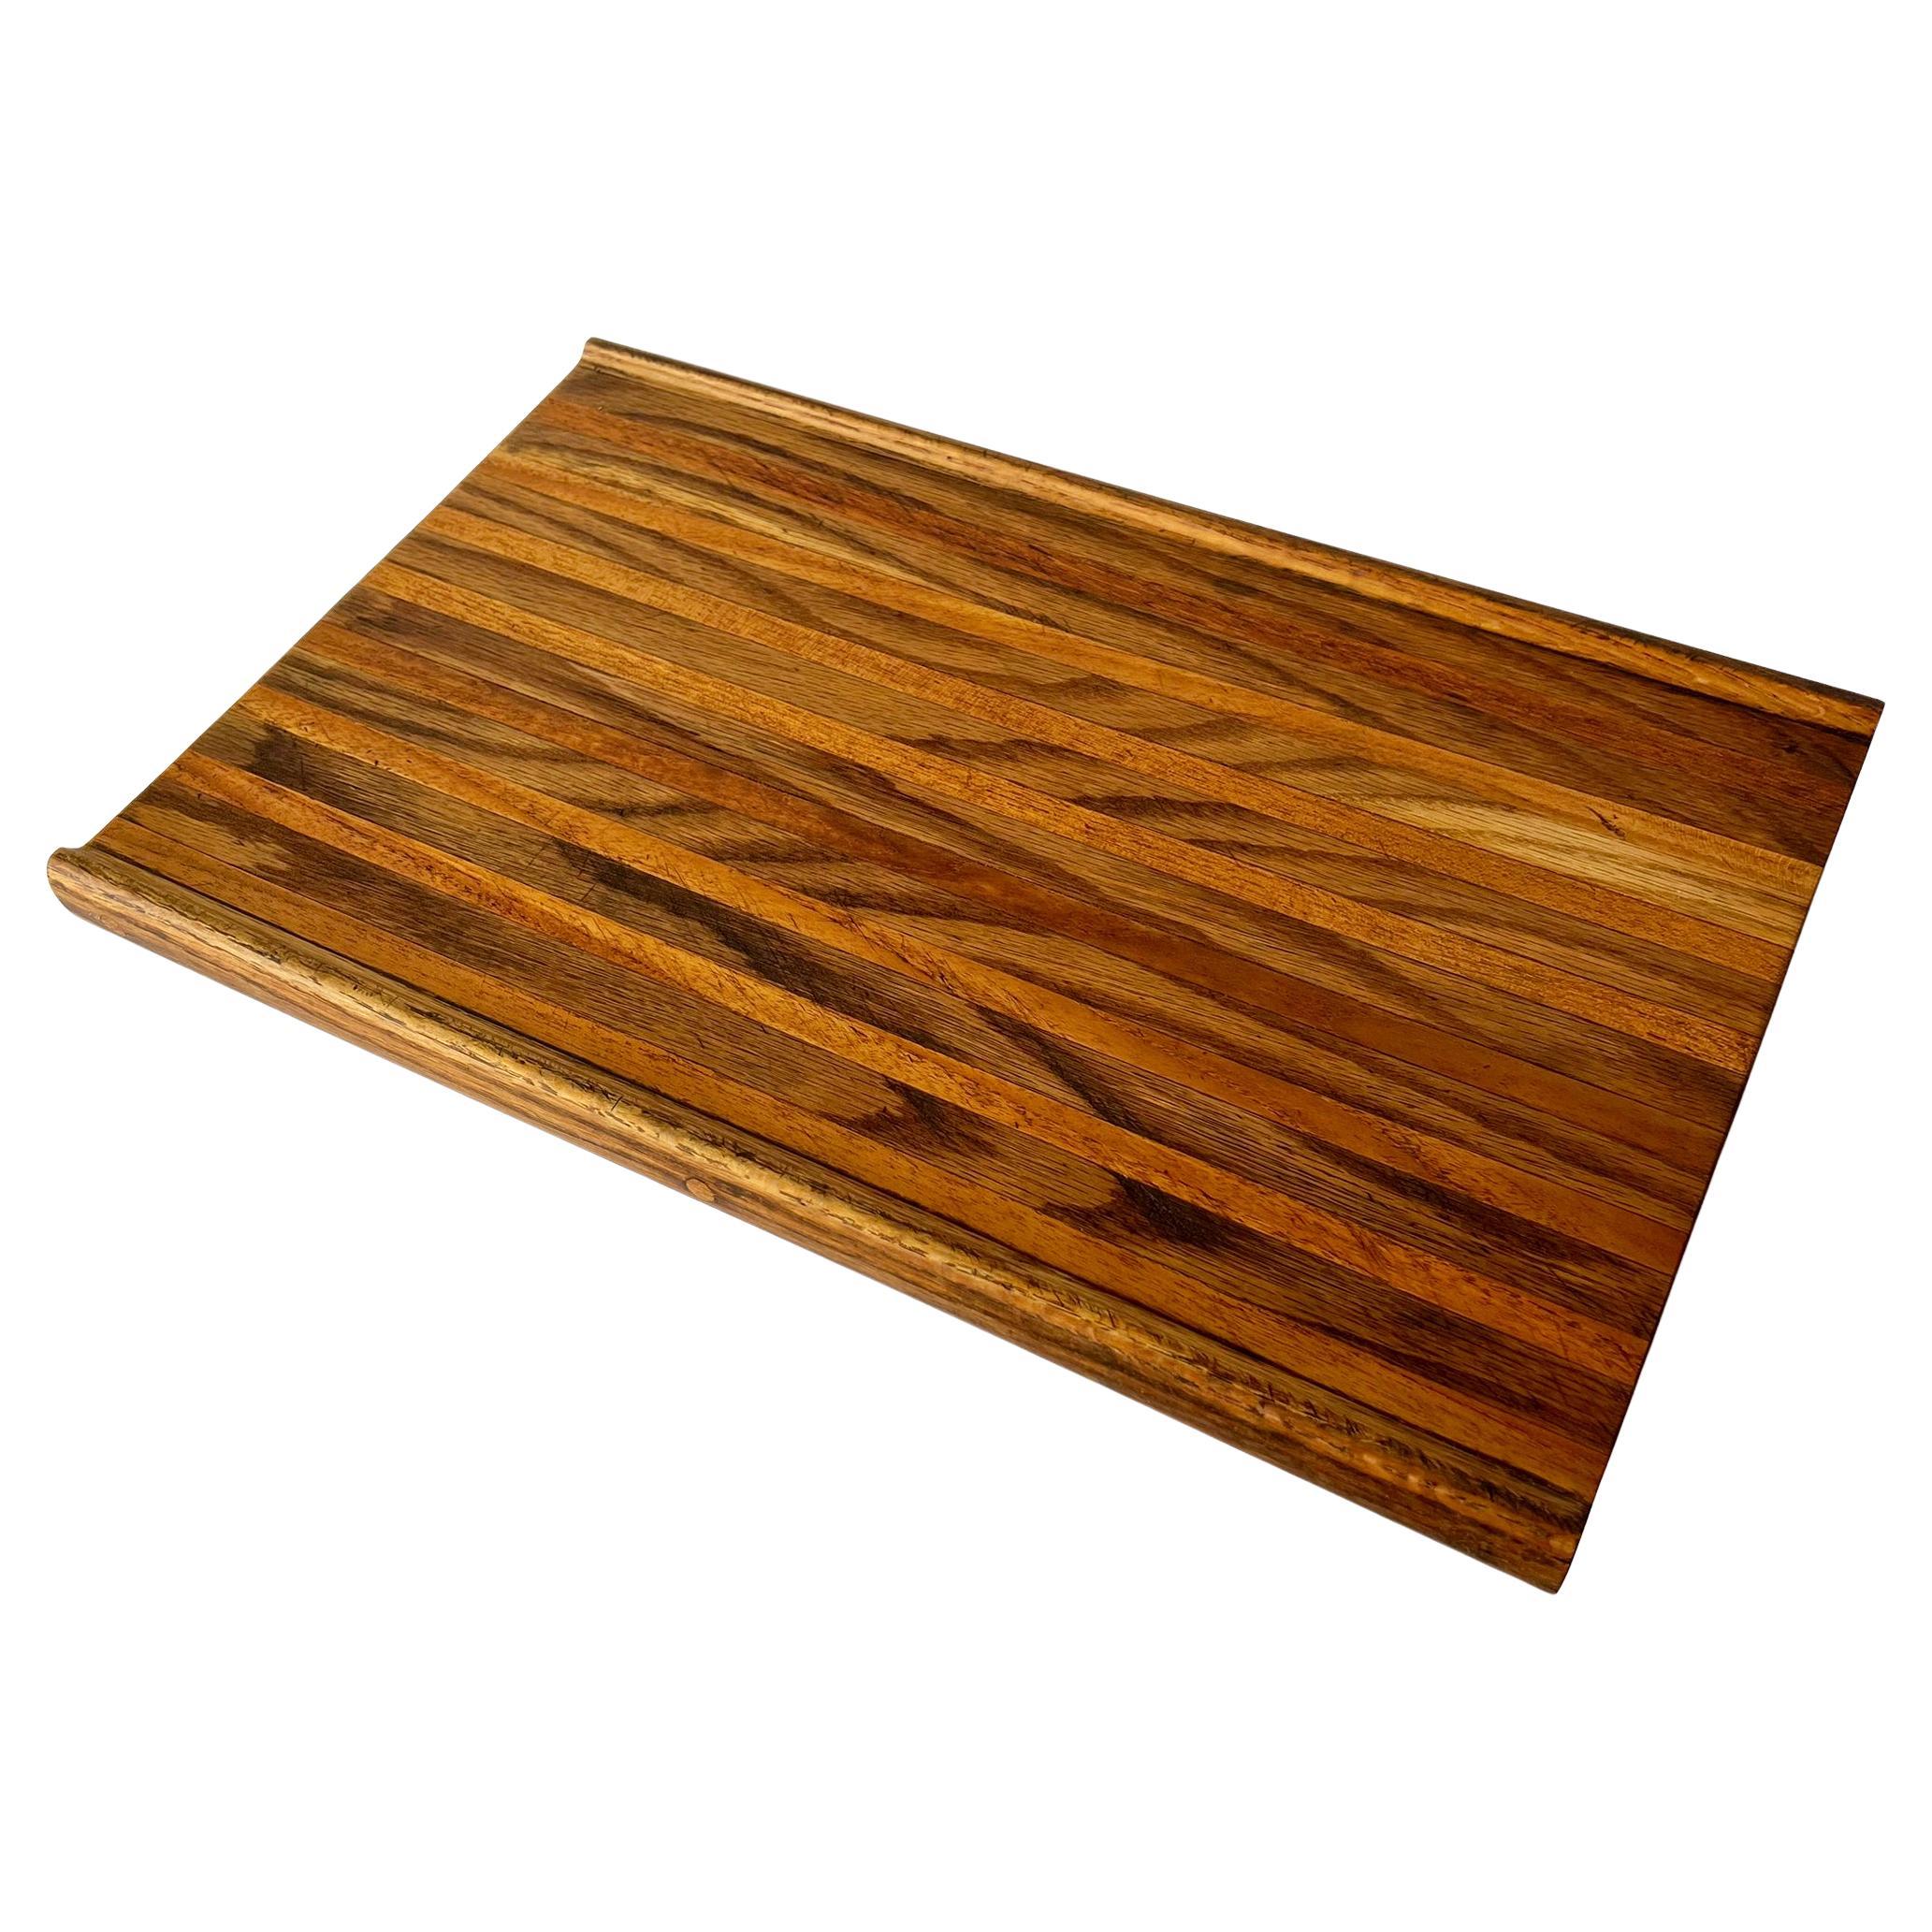 Robert Trout California Studio Made Allied Crafts Laminated Wood Cutting Board